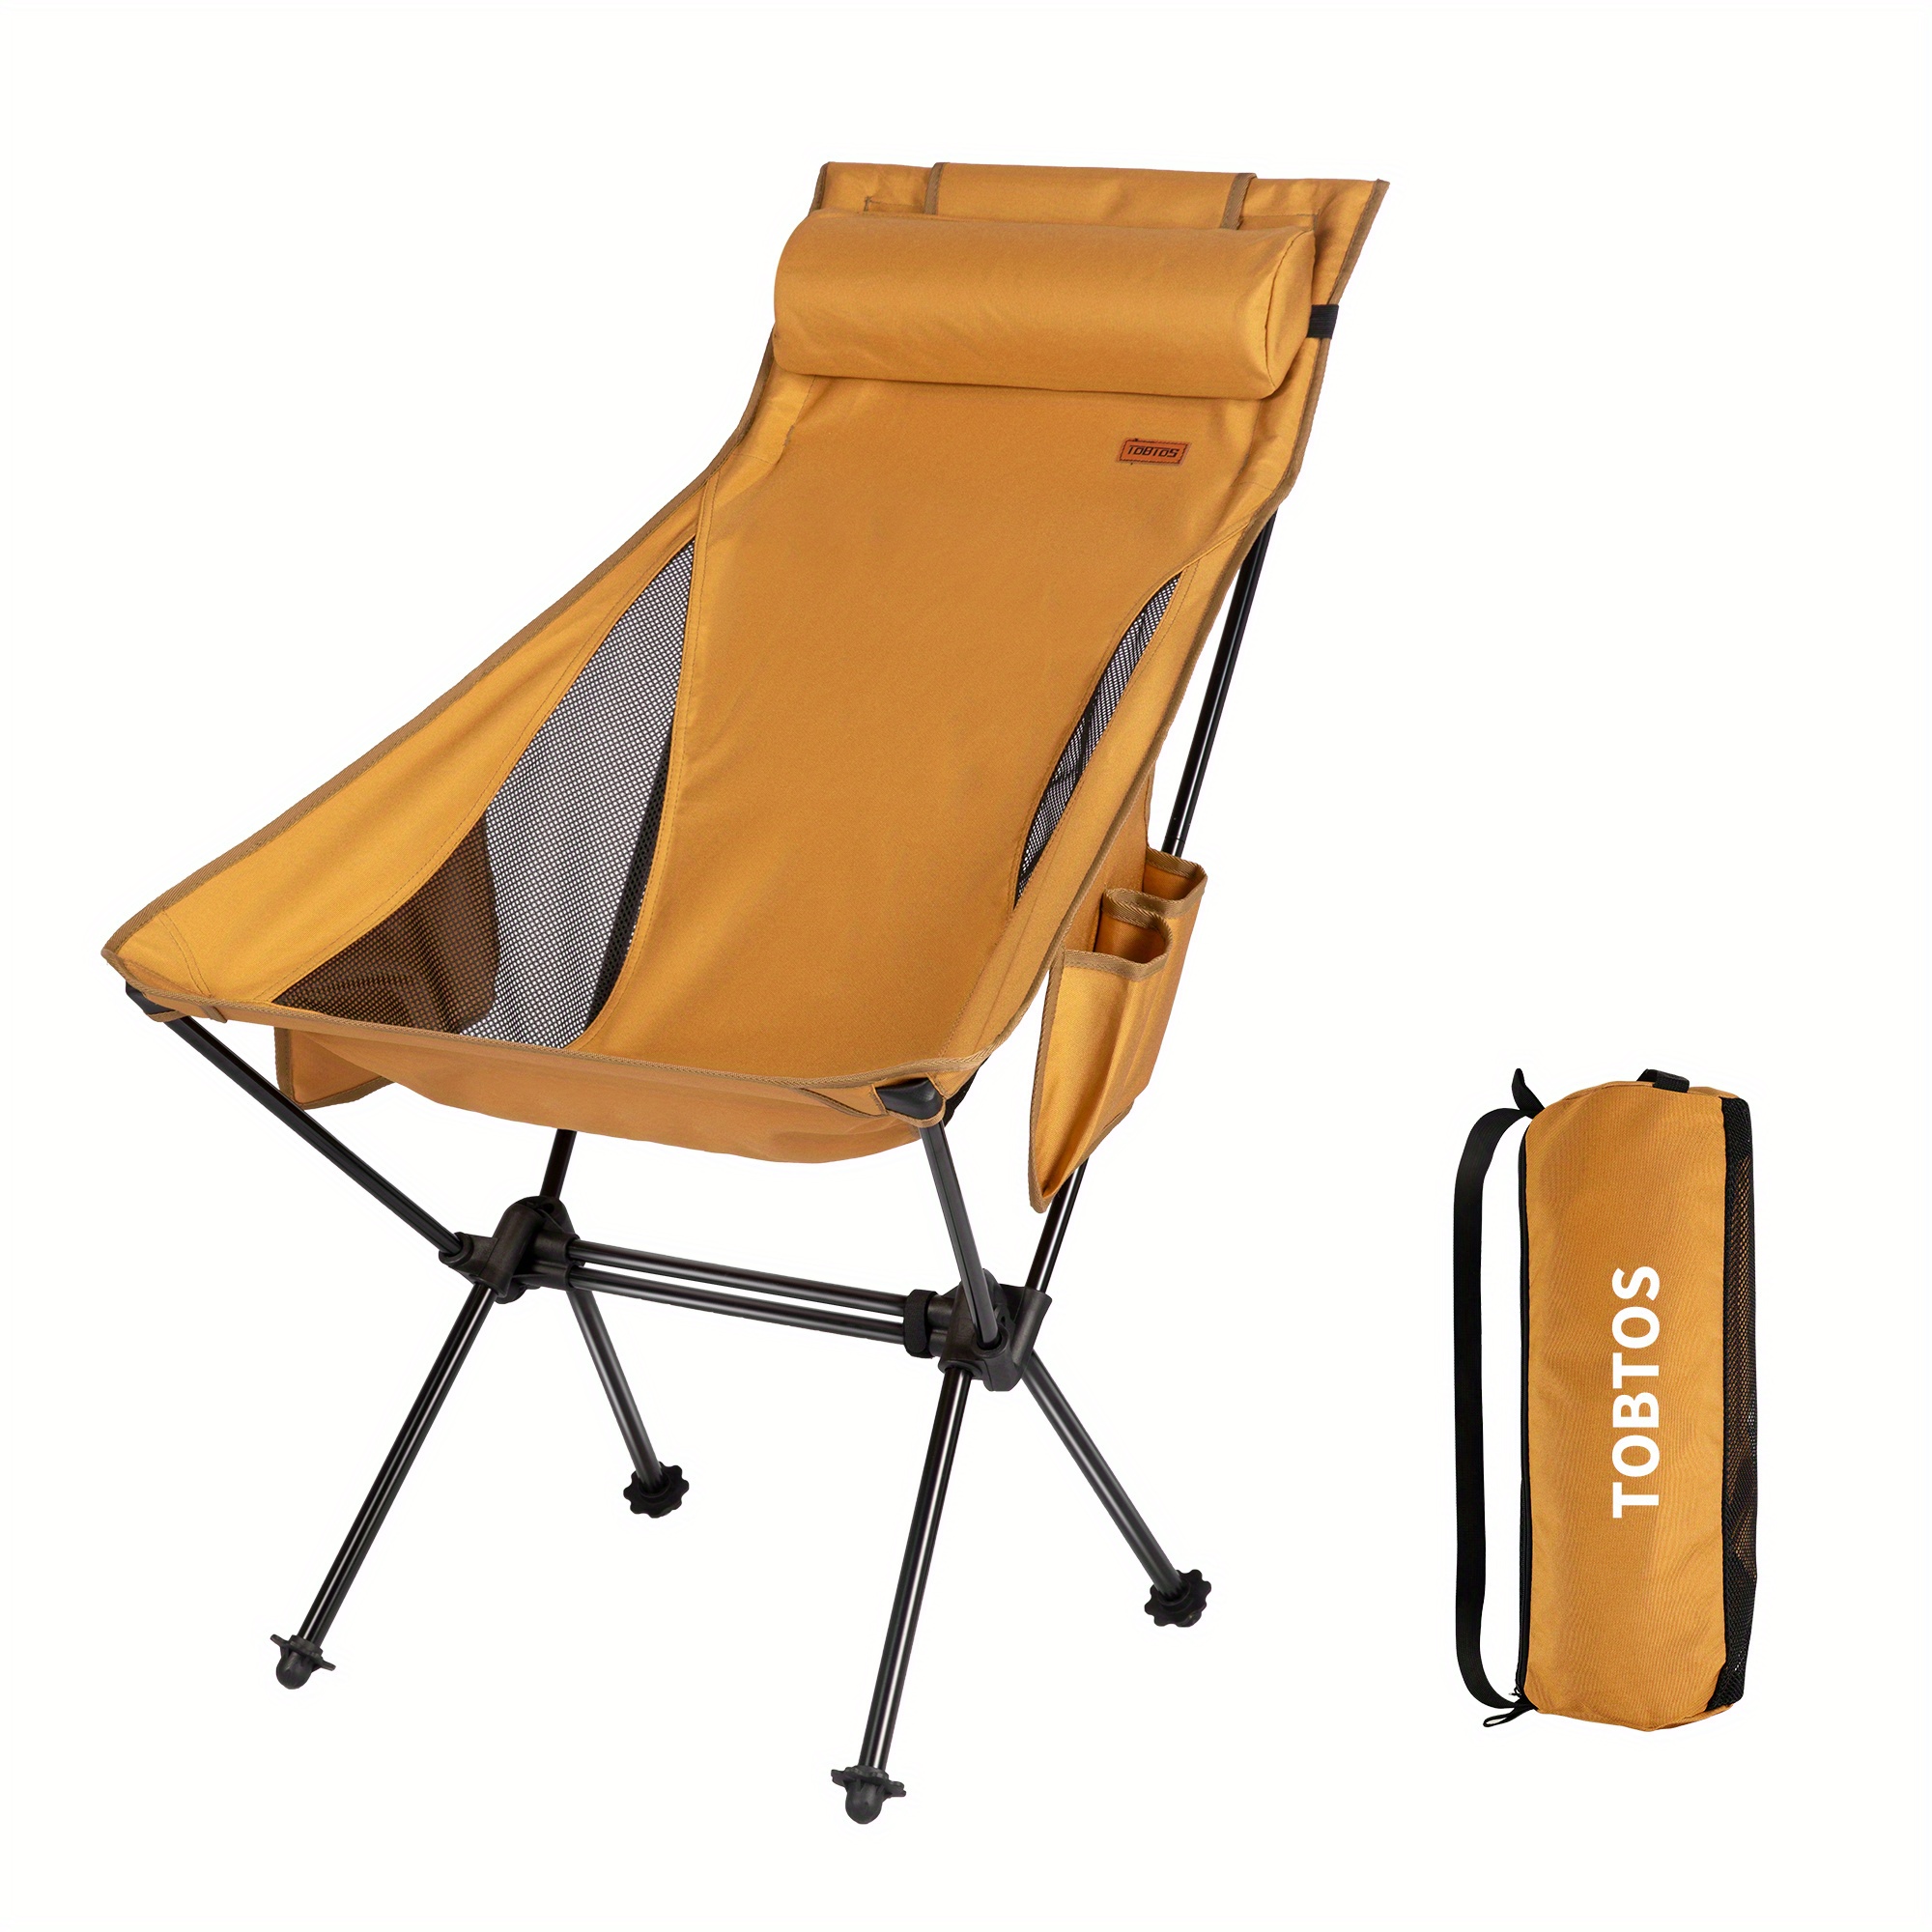 Lightweight High Back Camping Chair With Carry Bag Perfect For Outdoor  Activities Hiking Picnics And Backpacking, High-quality & Affordable